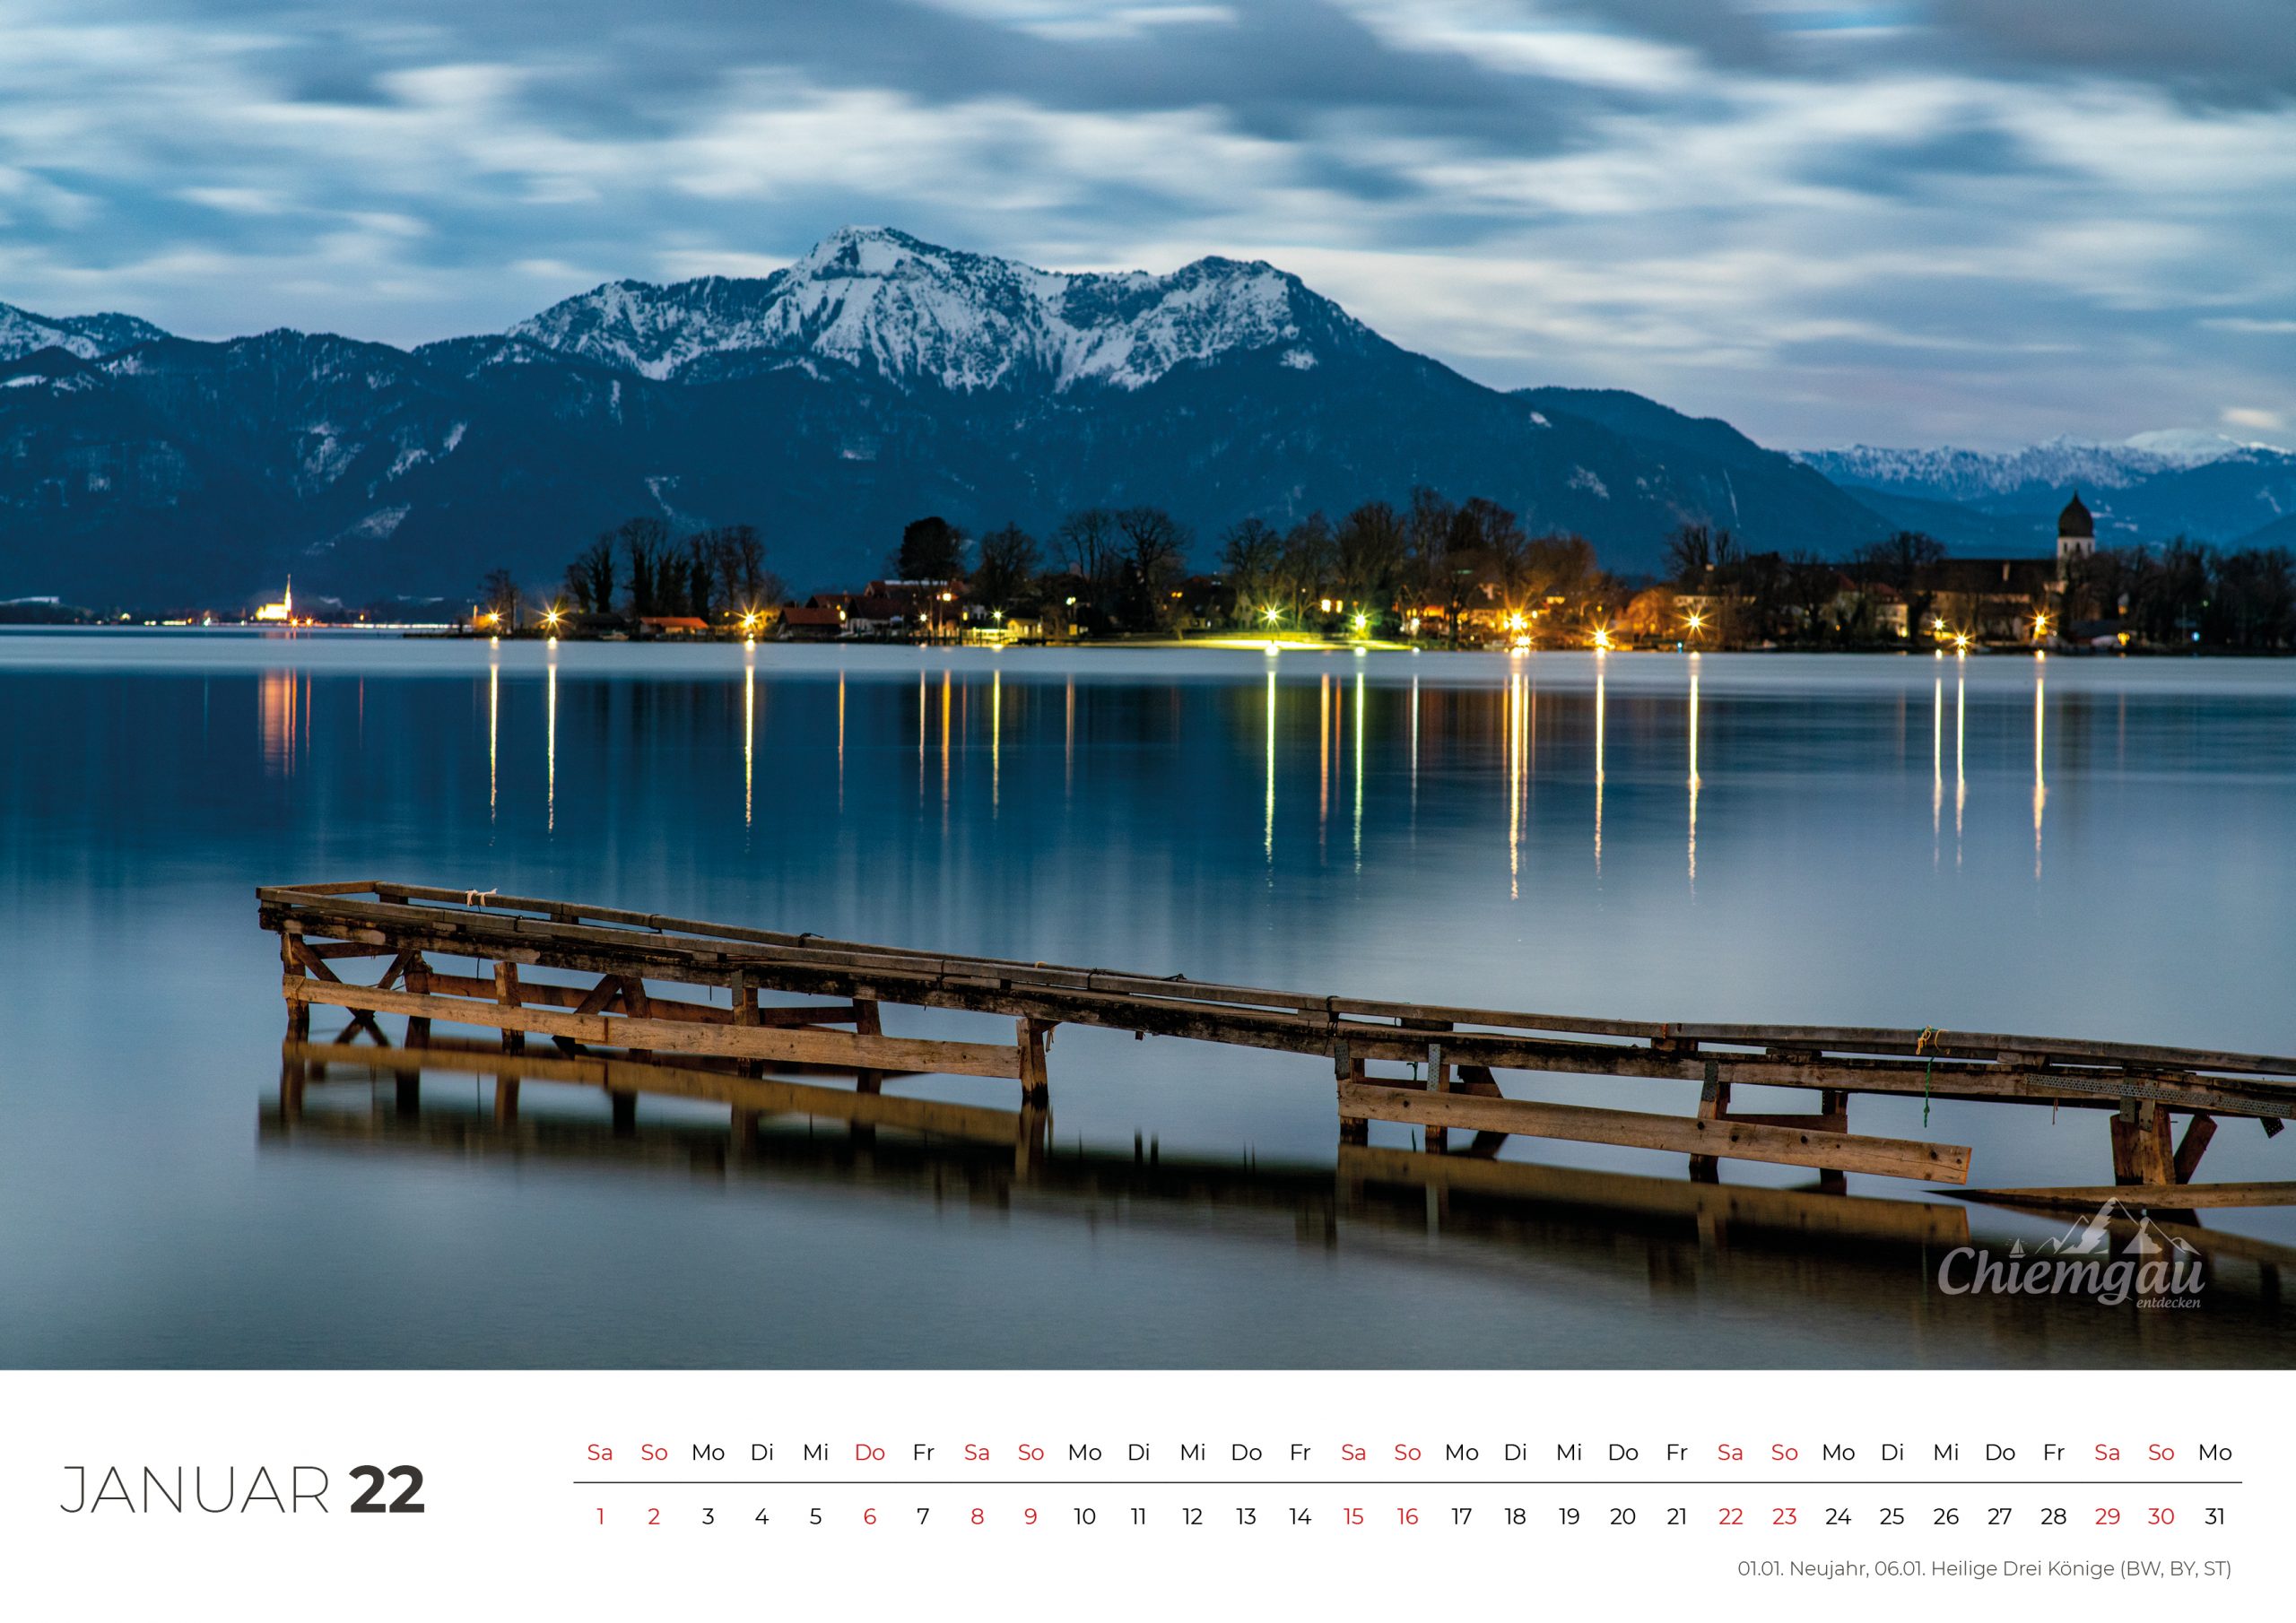 9783673065187 Wandkalender 2022 DIN A4 quer Stille Tage am Chiemsee 